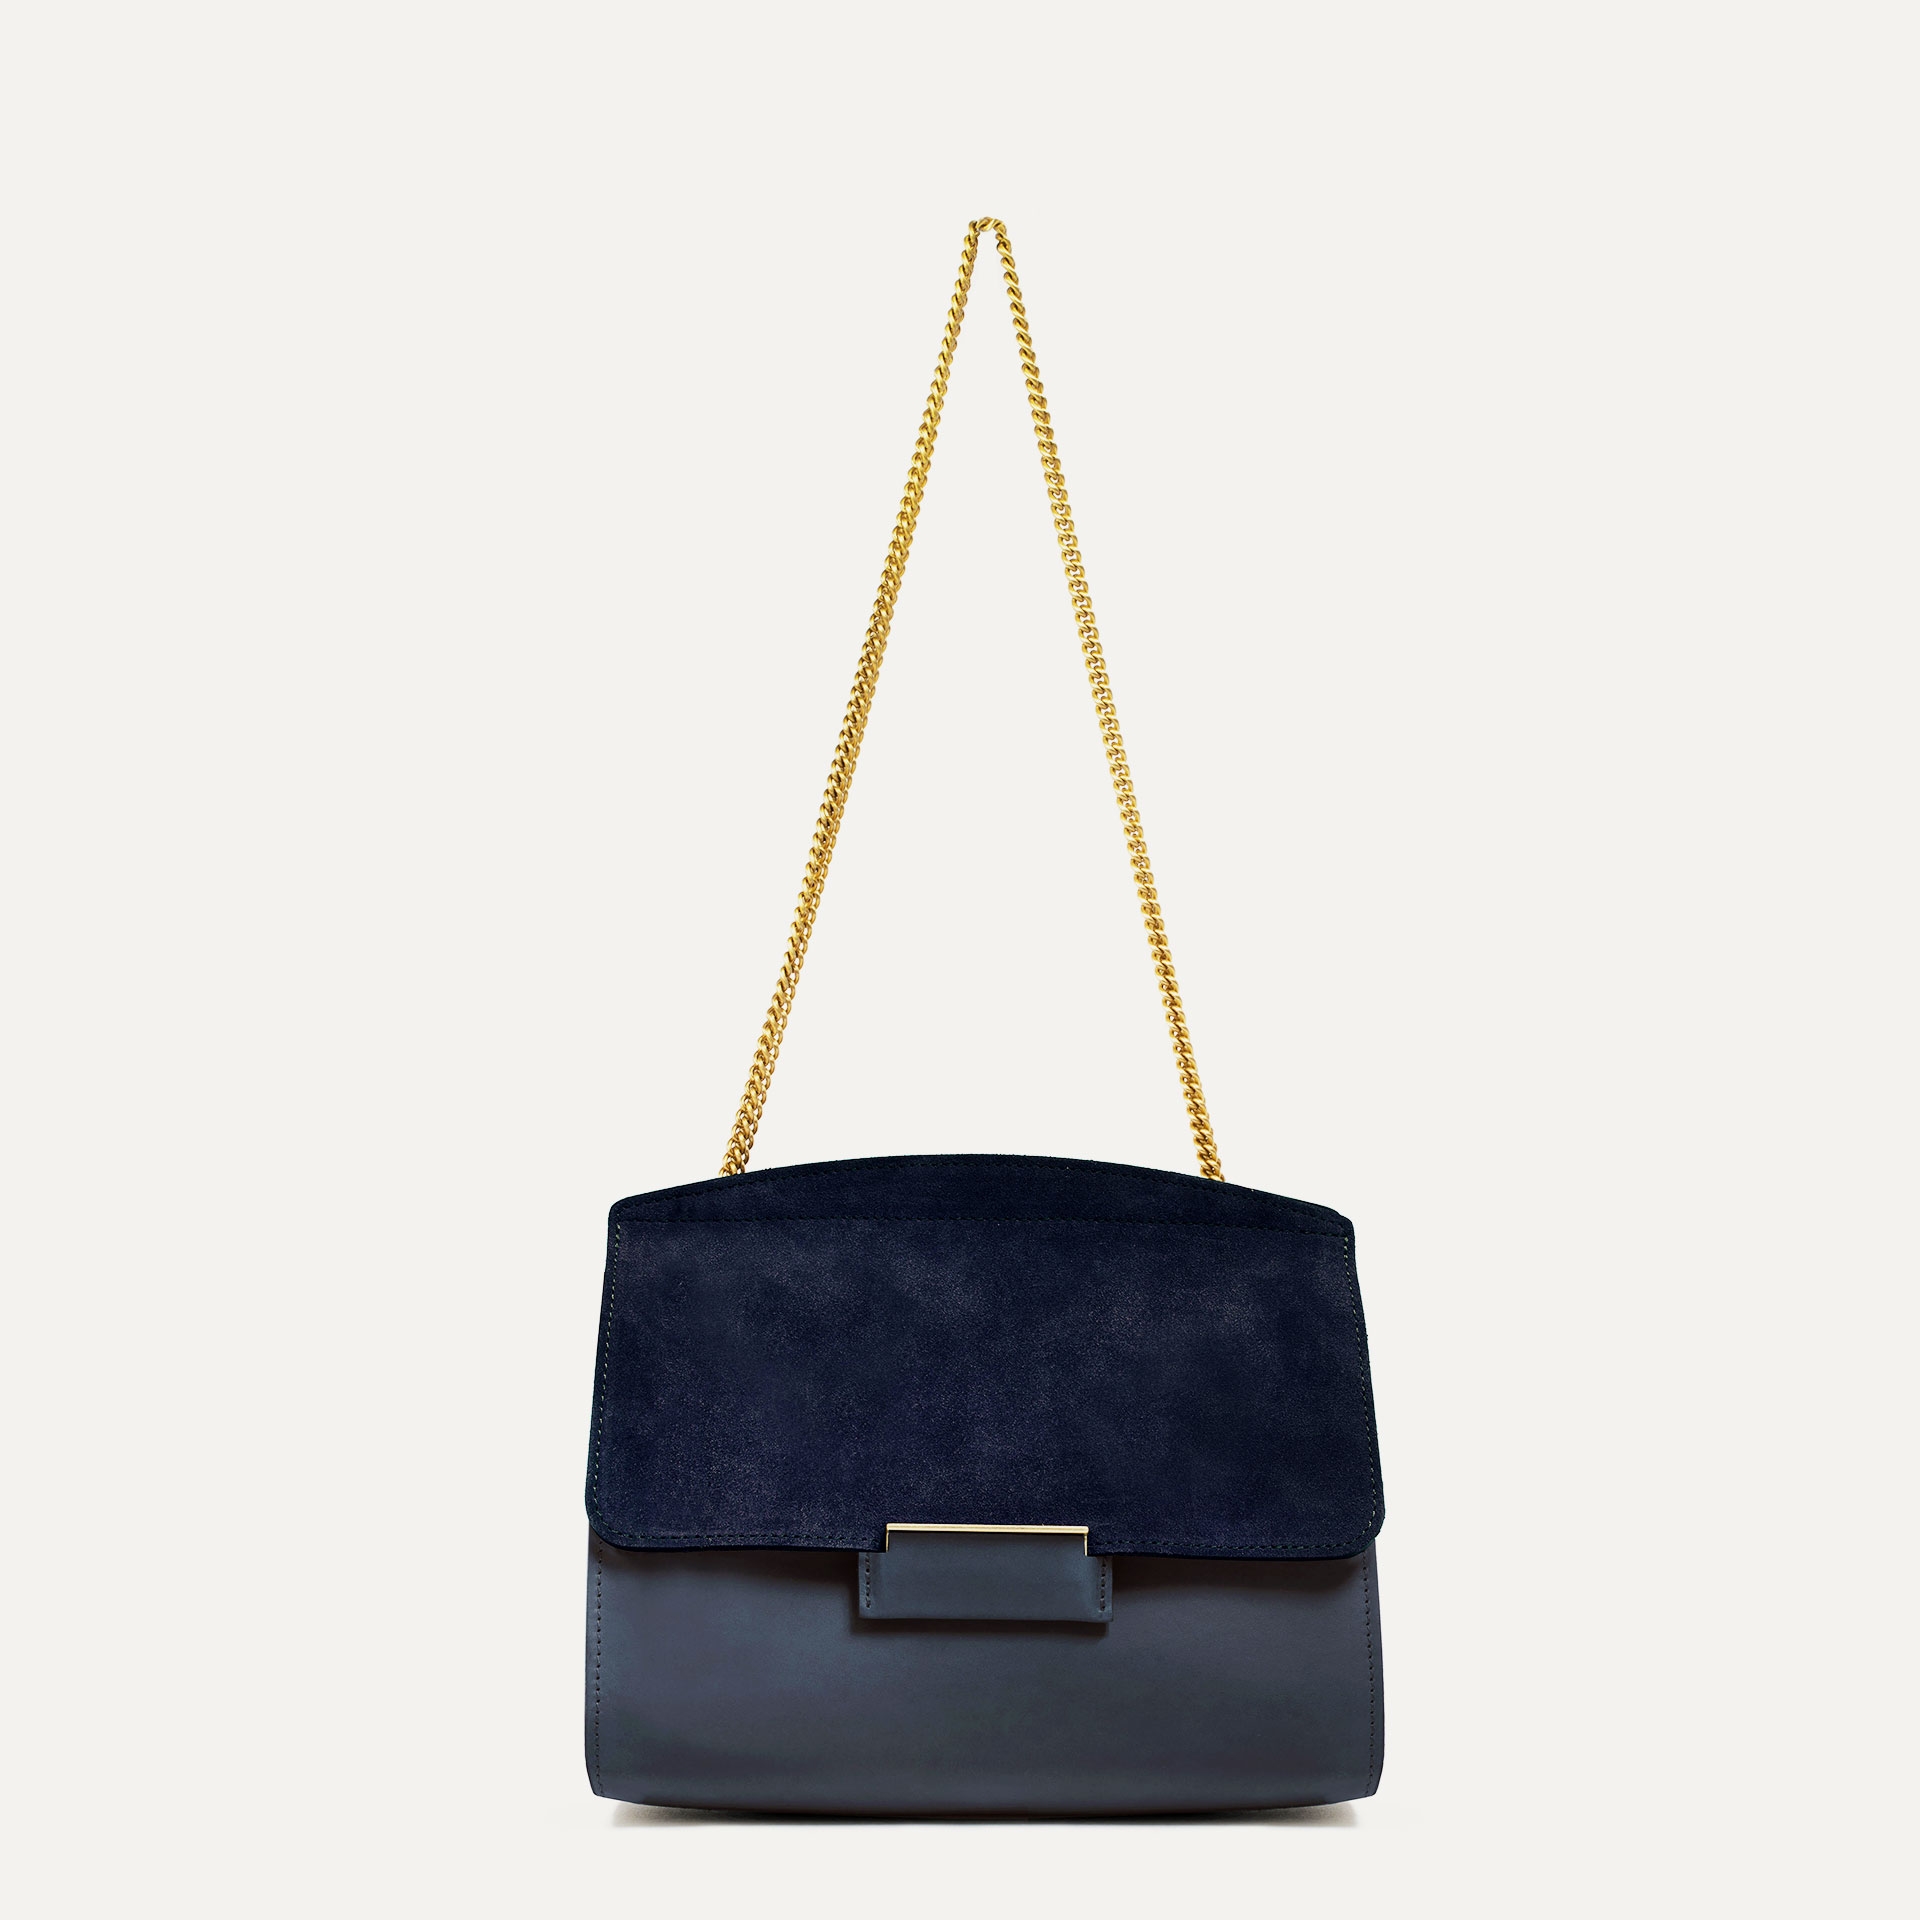 Origami S clutch bag - Navy Blue / MIx (image n°2)